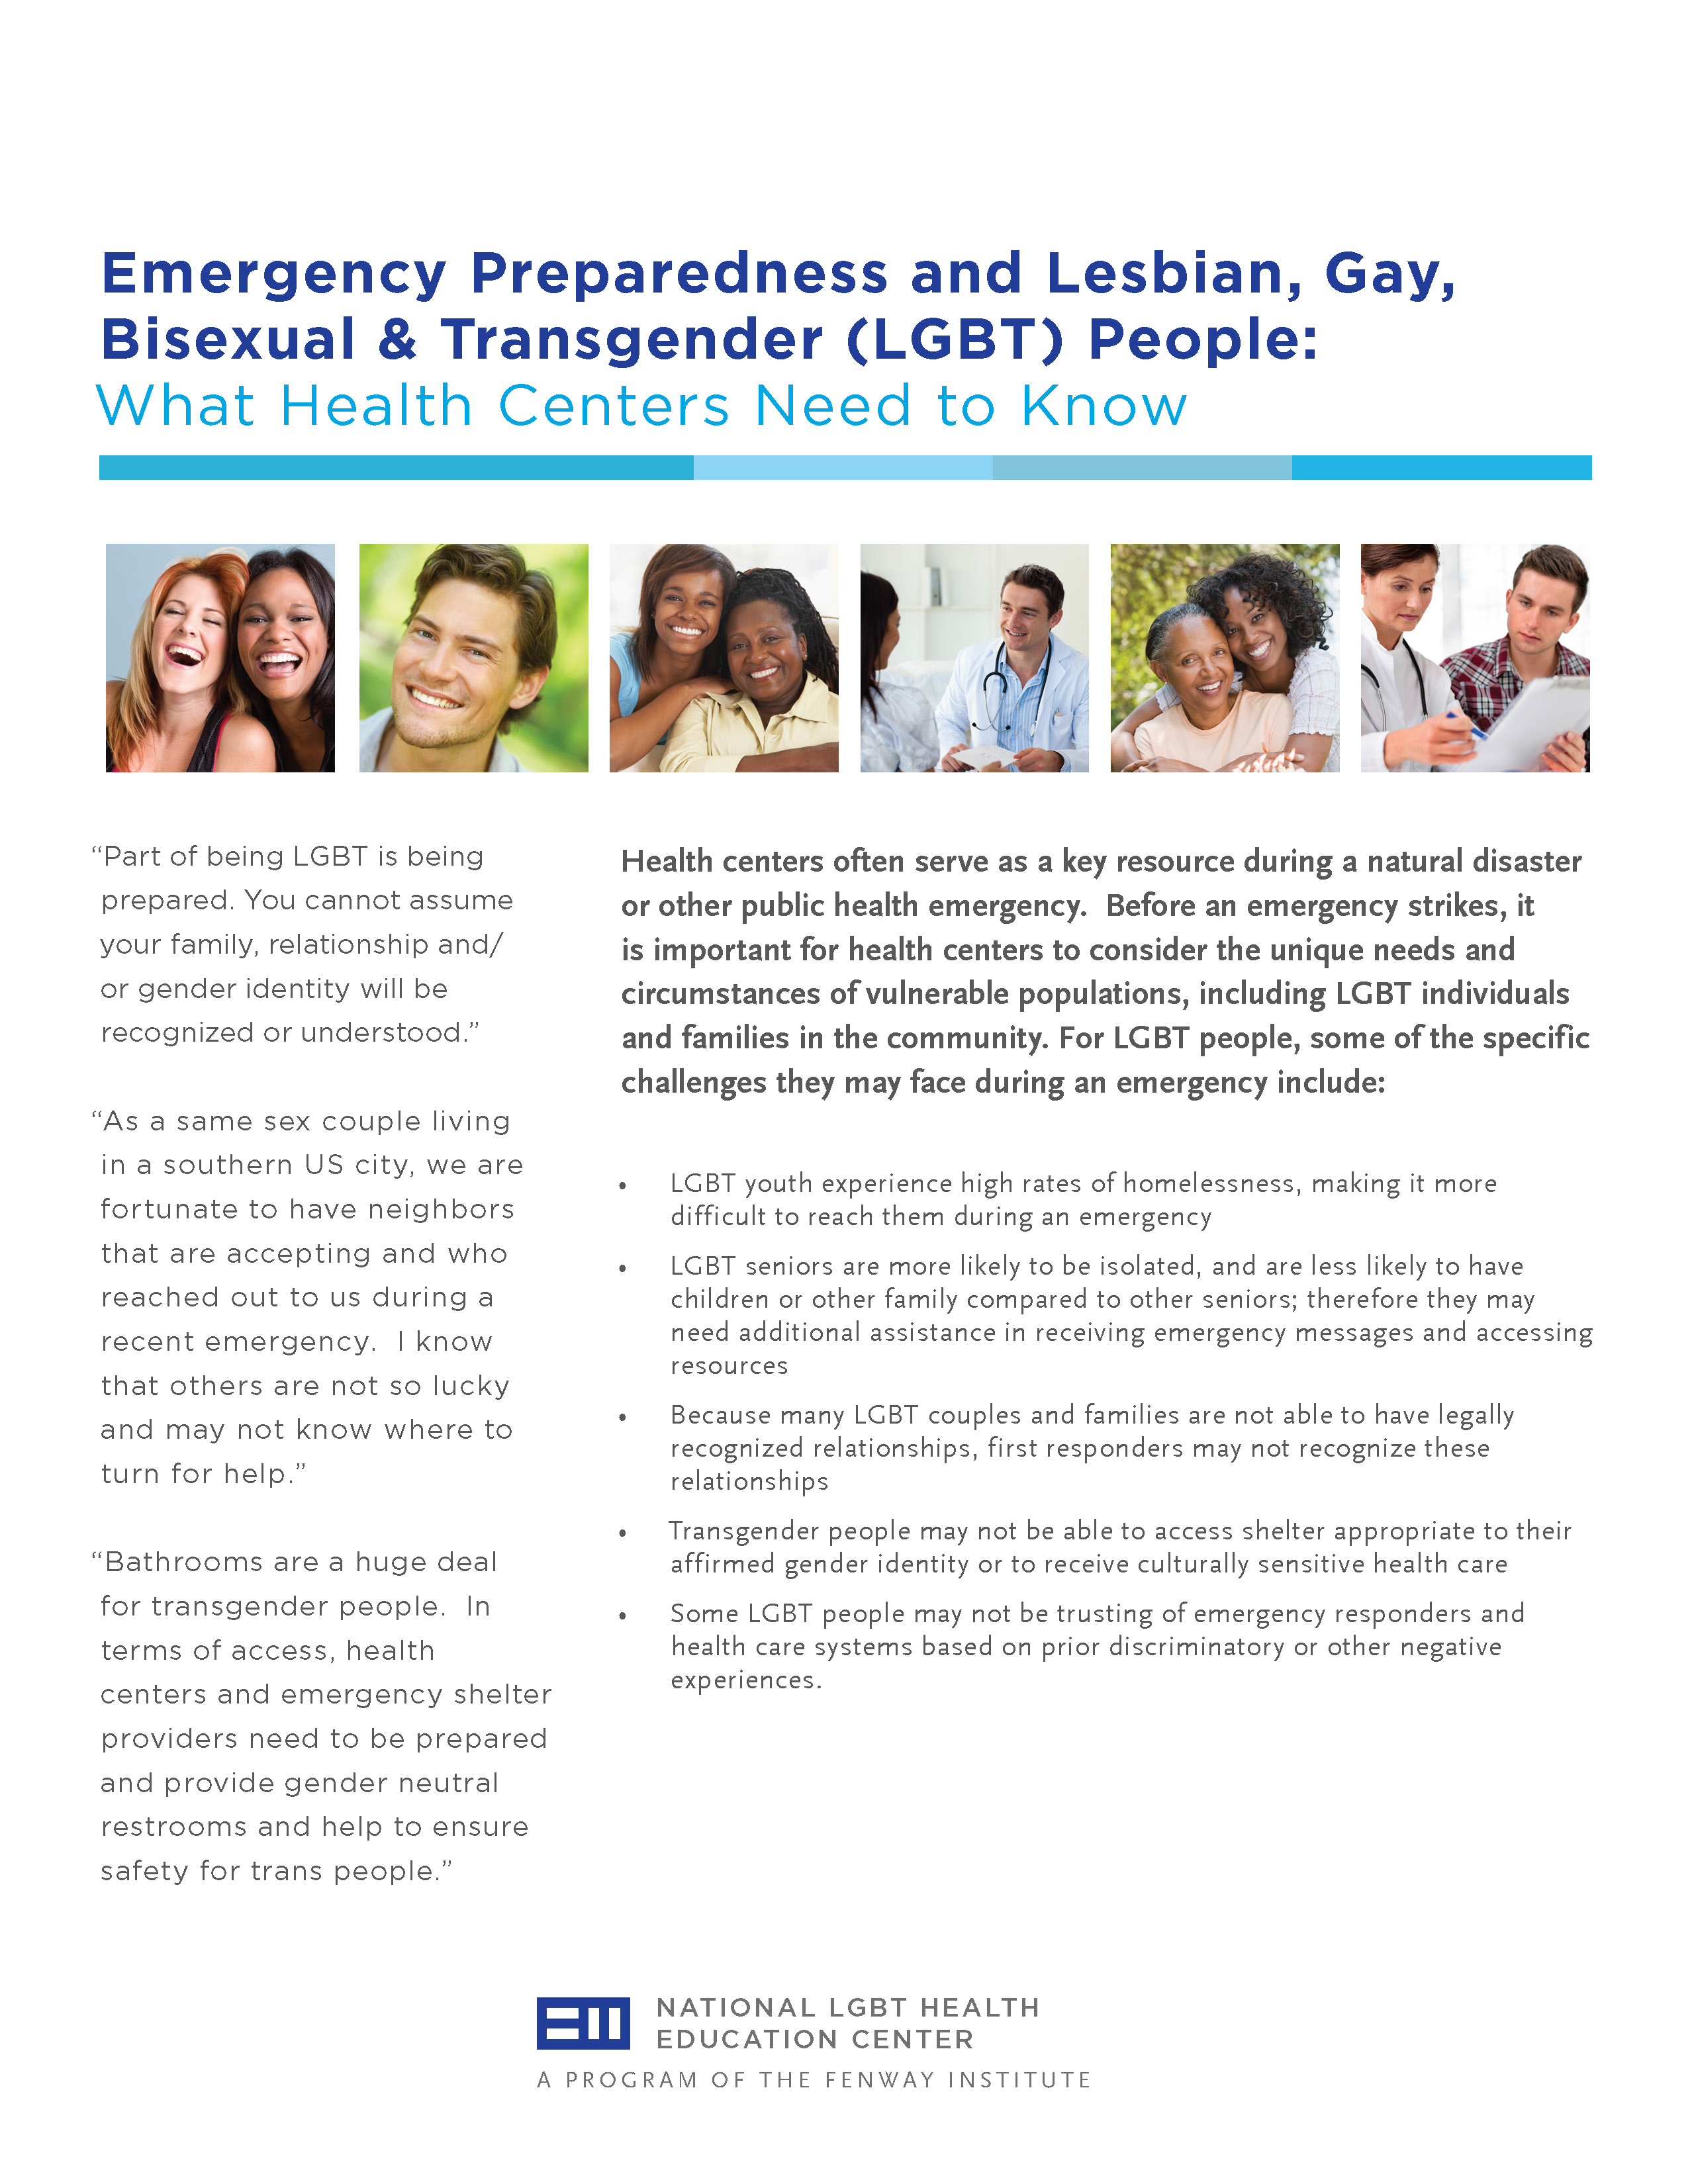 Emergency Preparedness and Lesbian, Gay, Bisexual and Transgender (LGBT) People What Health Centers Need to Know » LGBTQIA+ Health Education Center picture